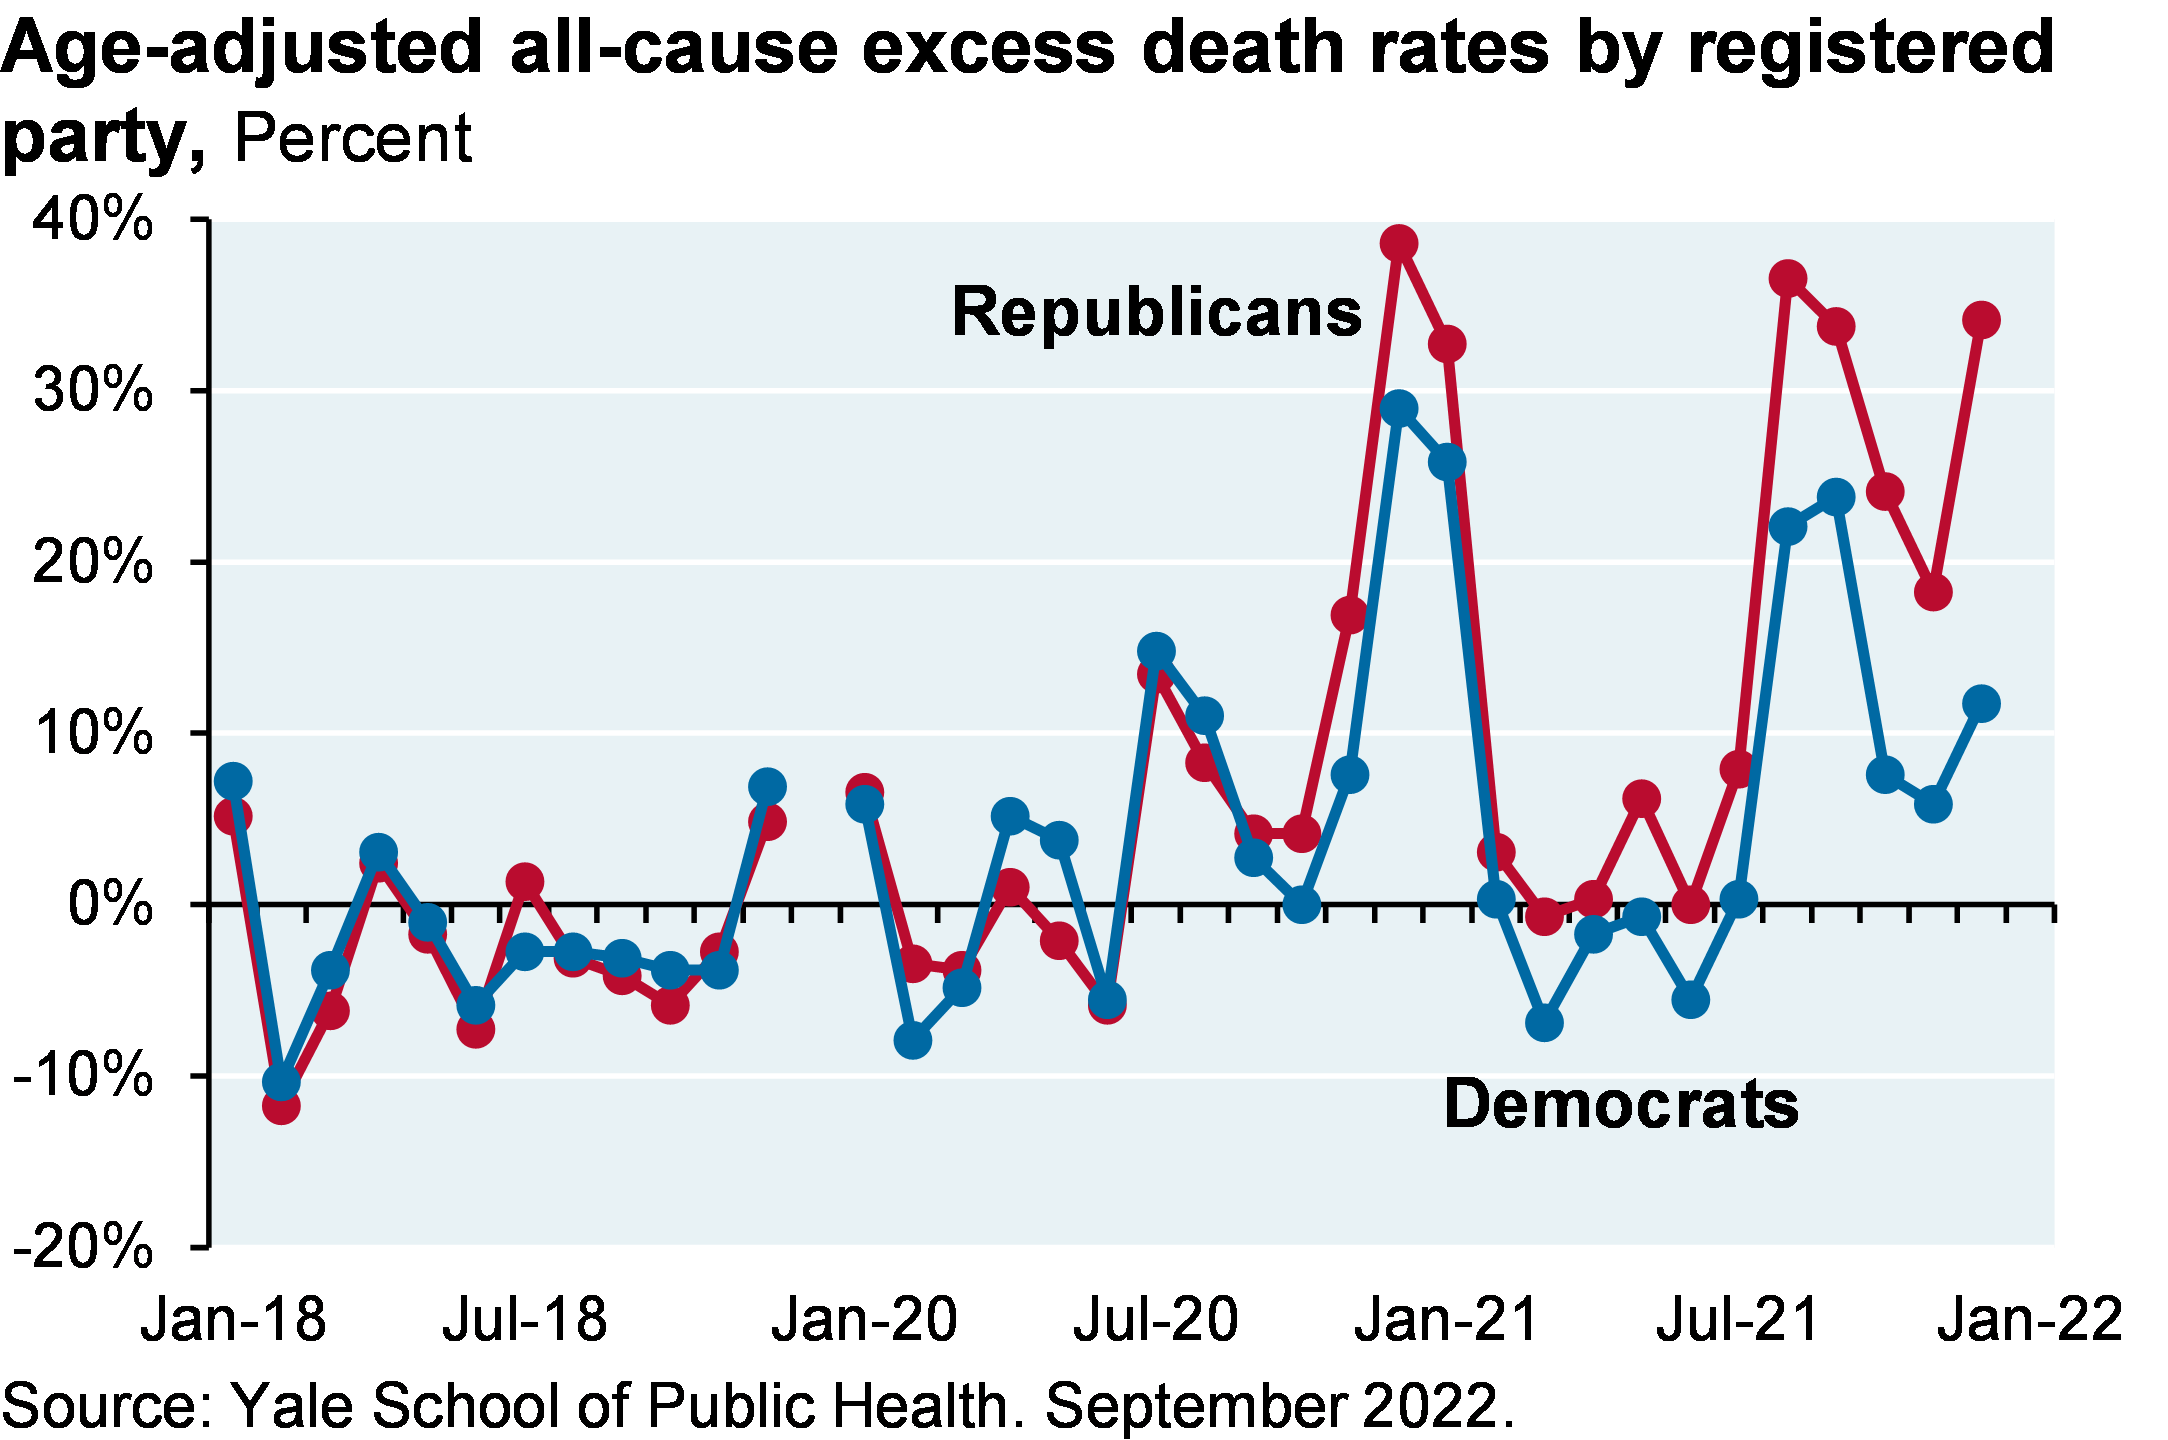 Line chart shows the age-adjusted excess death rates from all causes for Republicans vs Democrats. Excess death rates have been consistently higher for the Republican party since the end of 2020